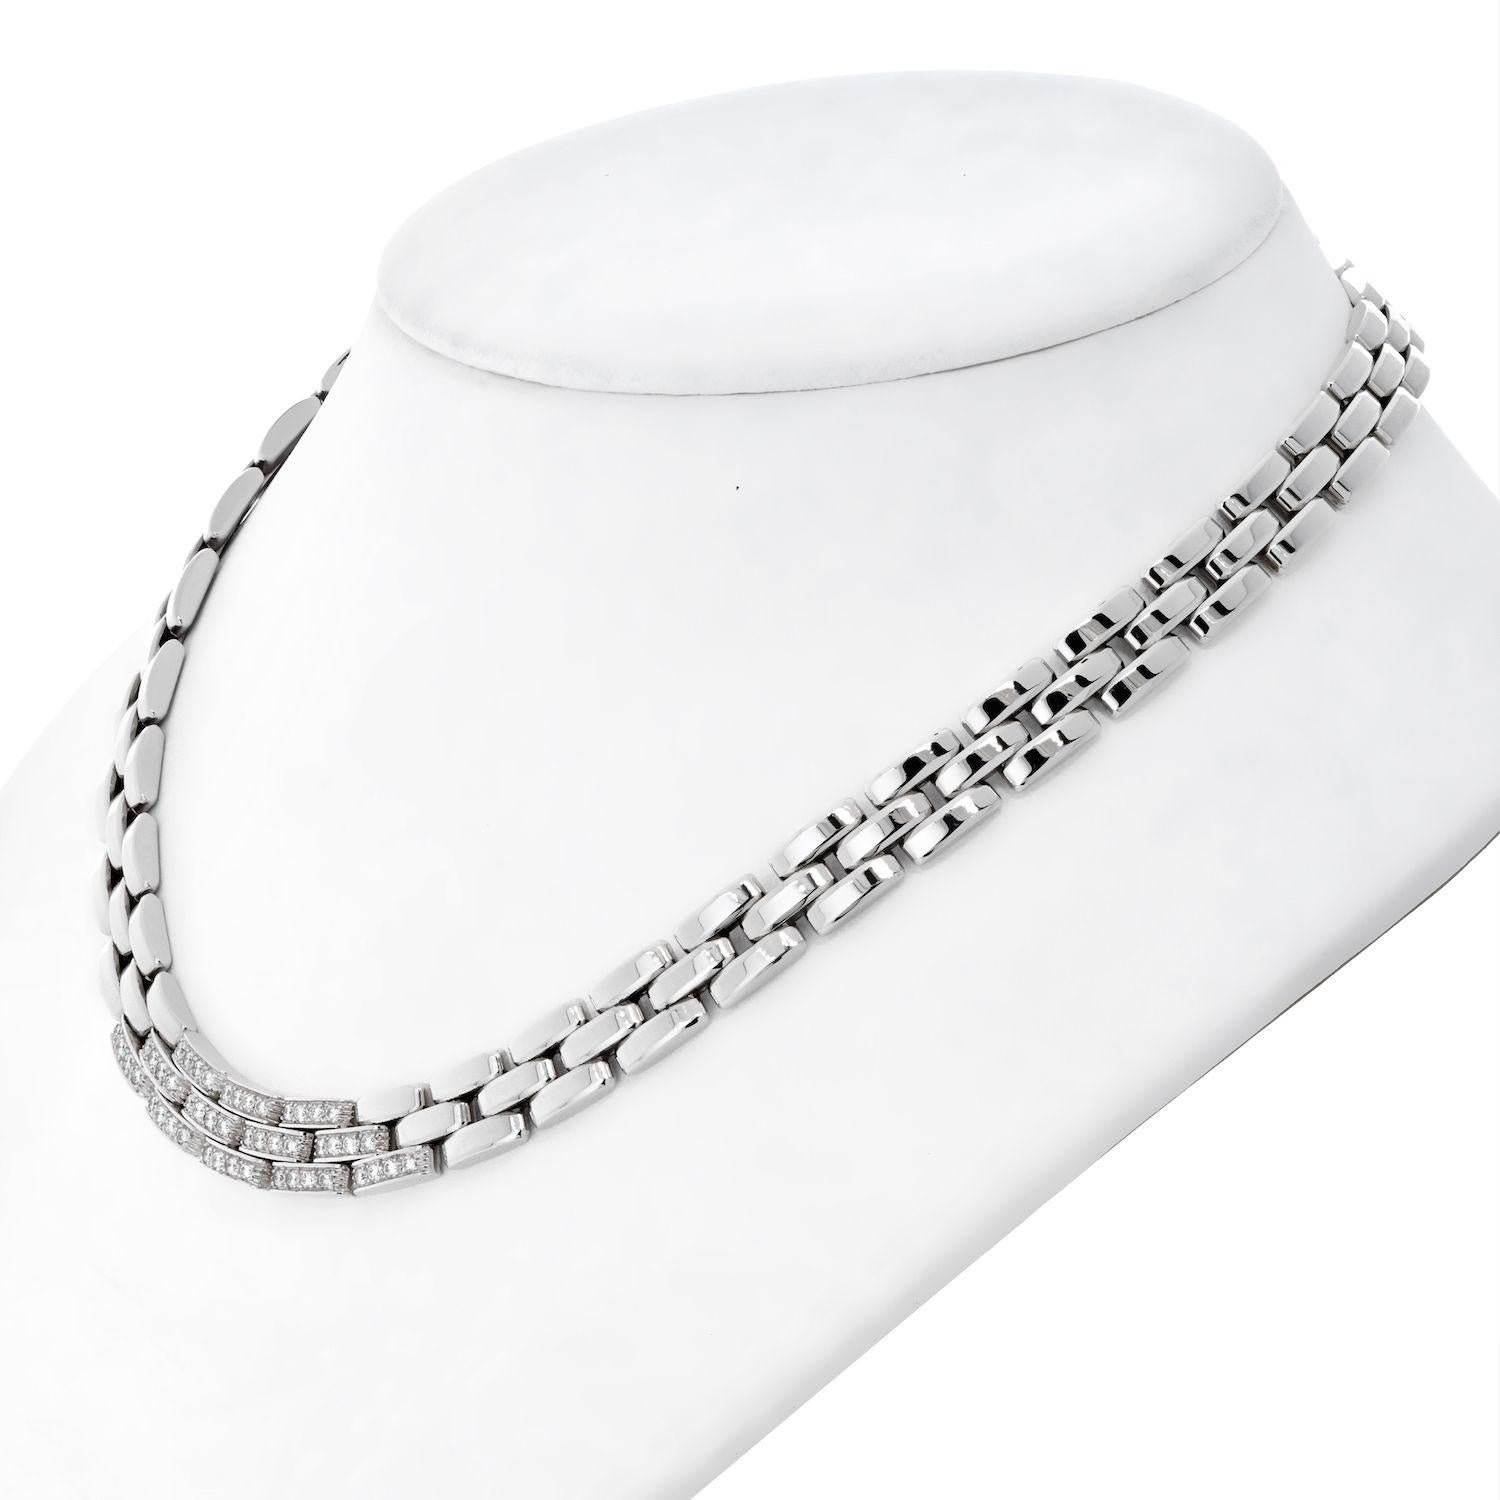 A beautiful 18k white gold diamond necklace from the Cartier Maillon collection. The necklace is composed of plain 18k white gold links of the iconic Maillon brick link design, complemented by a pave set diamond intersection set to the front